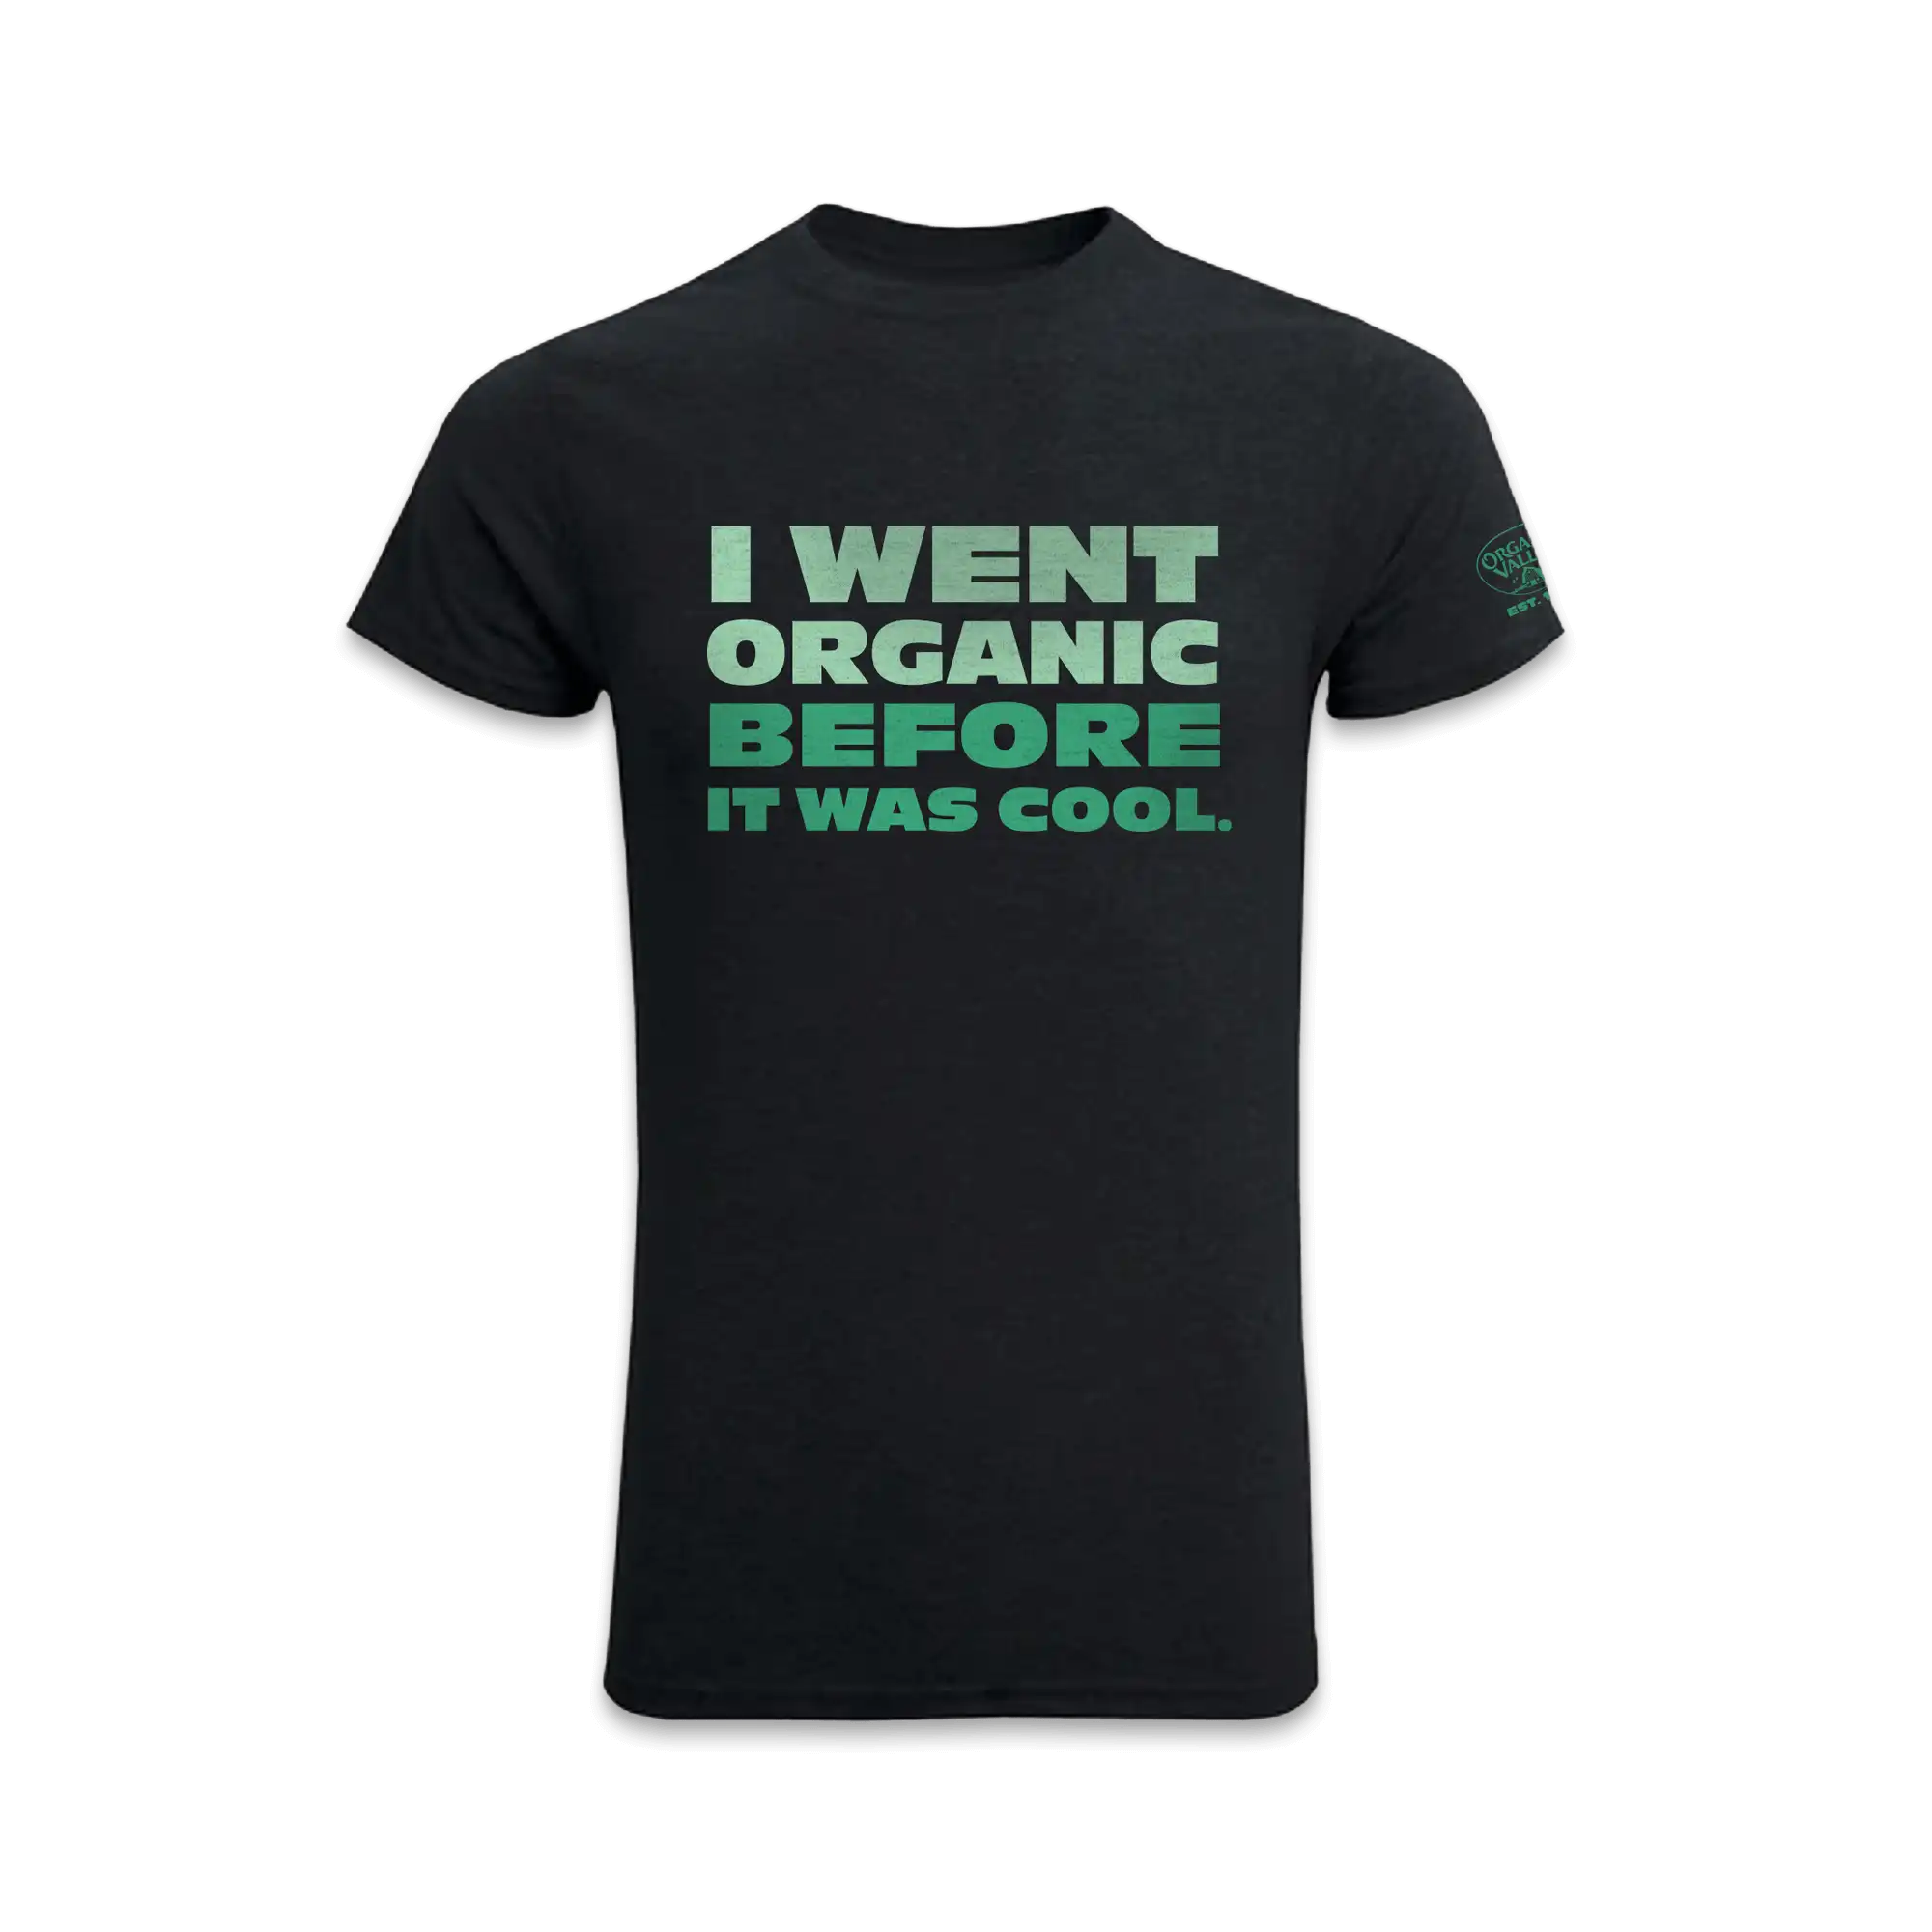 Visit the I Went Organic Tee Product Page